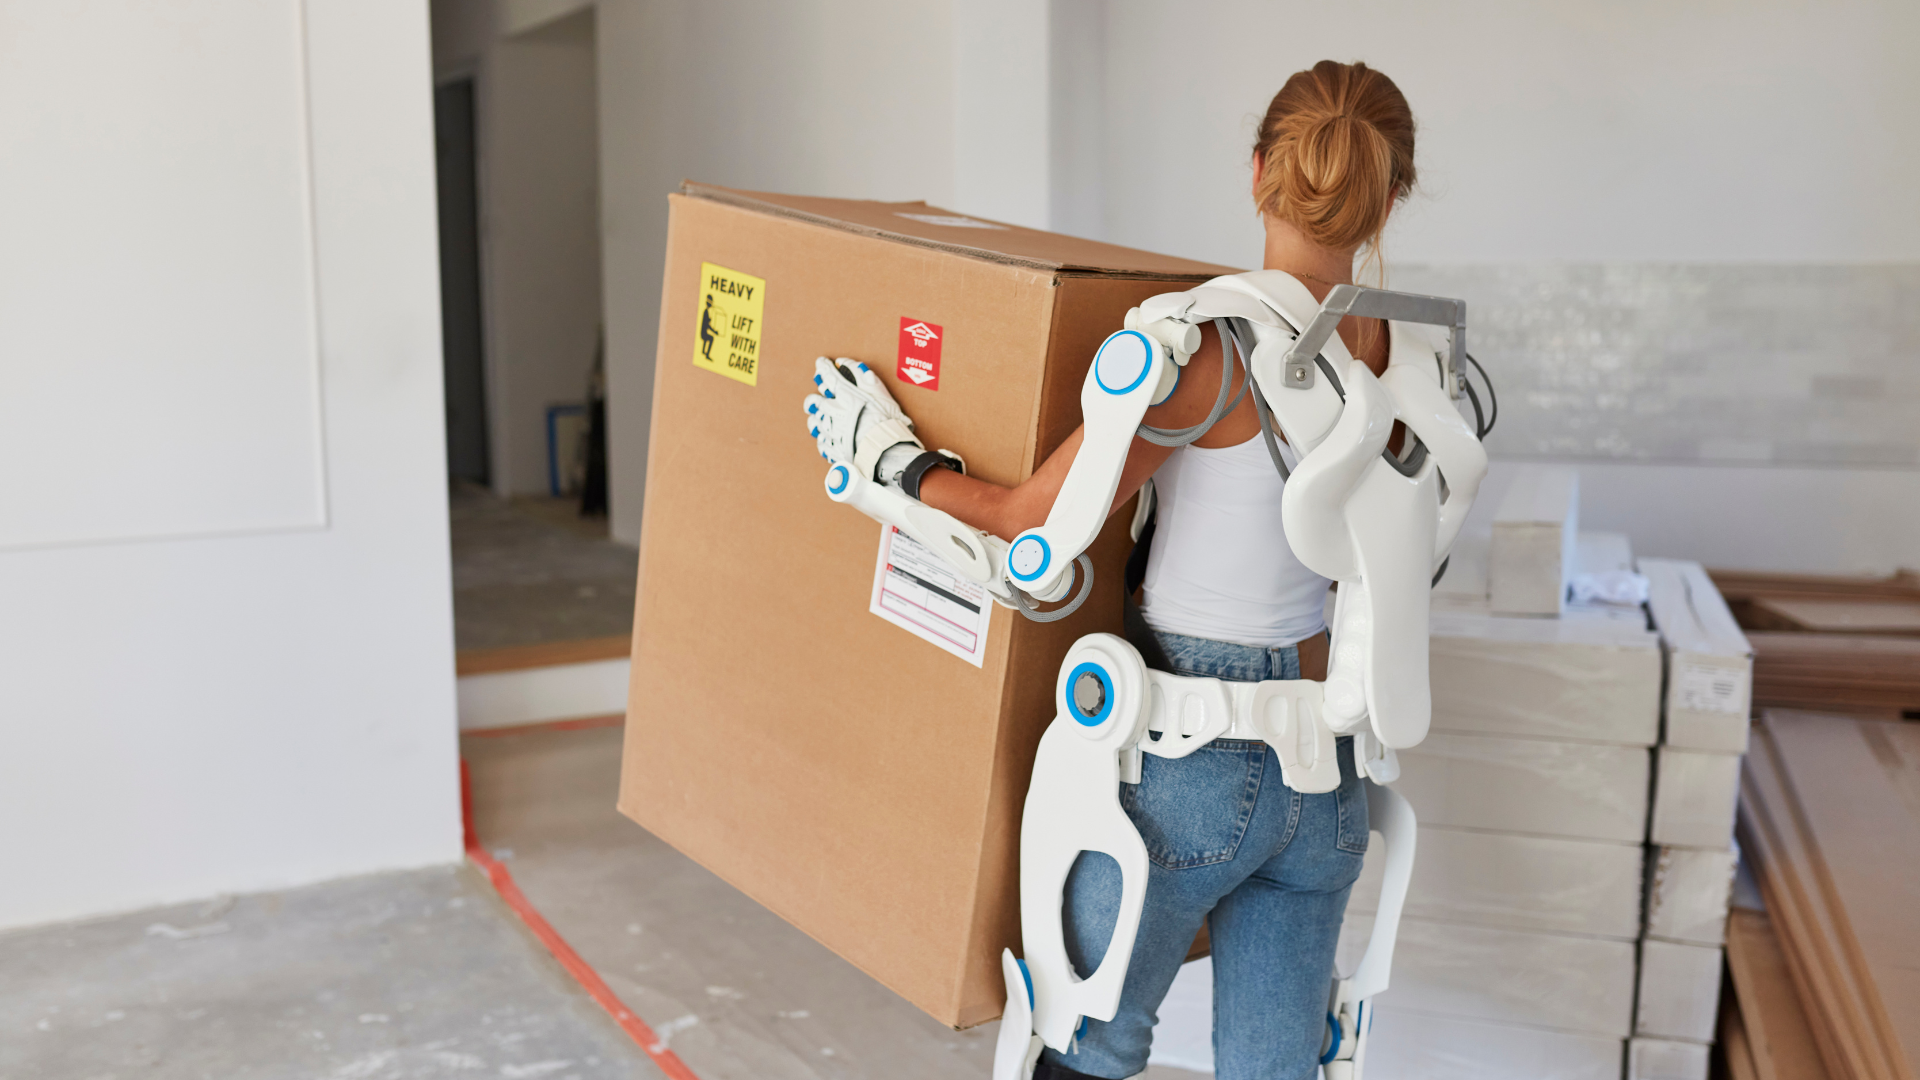 Exoskeletons on Worksites Select an Image